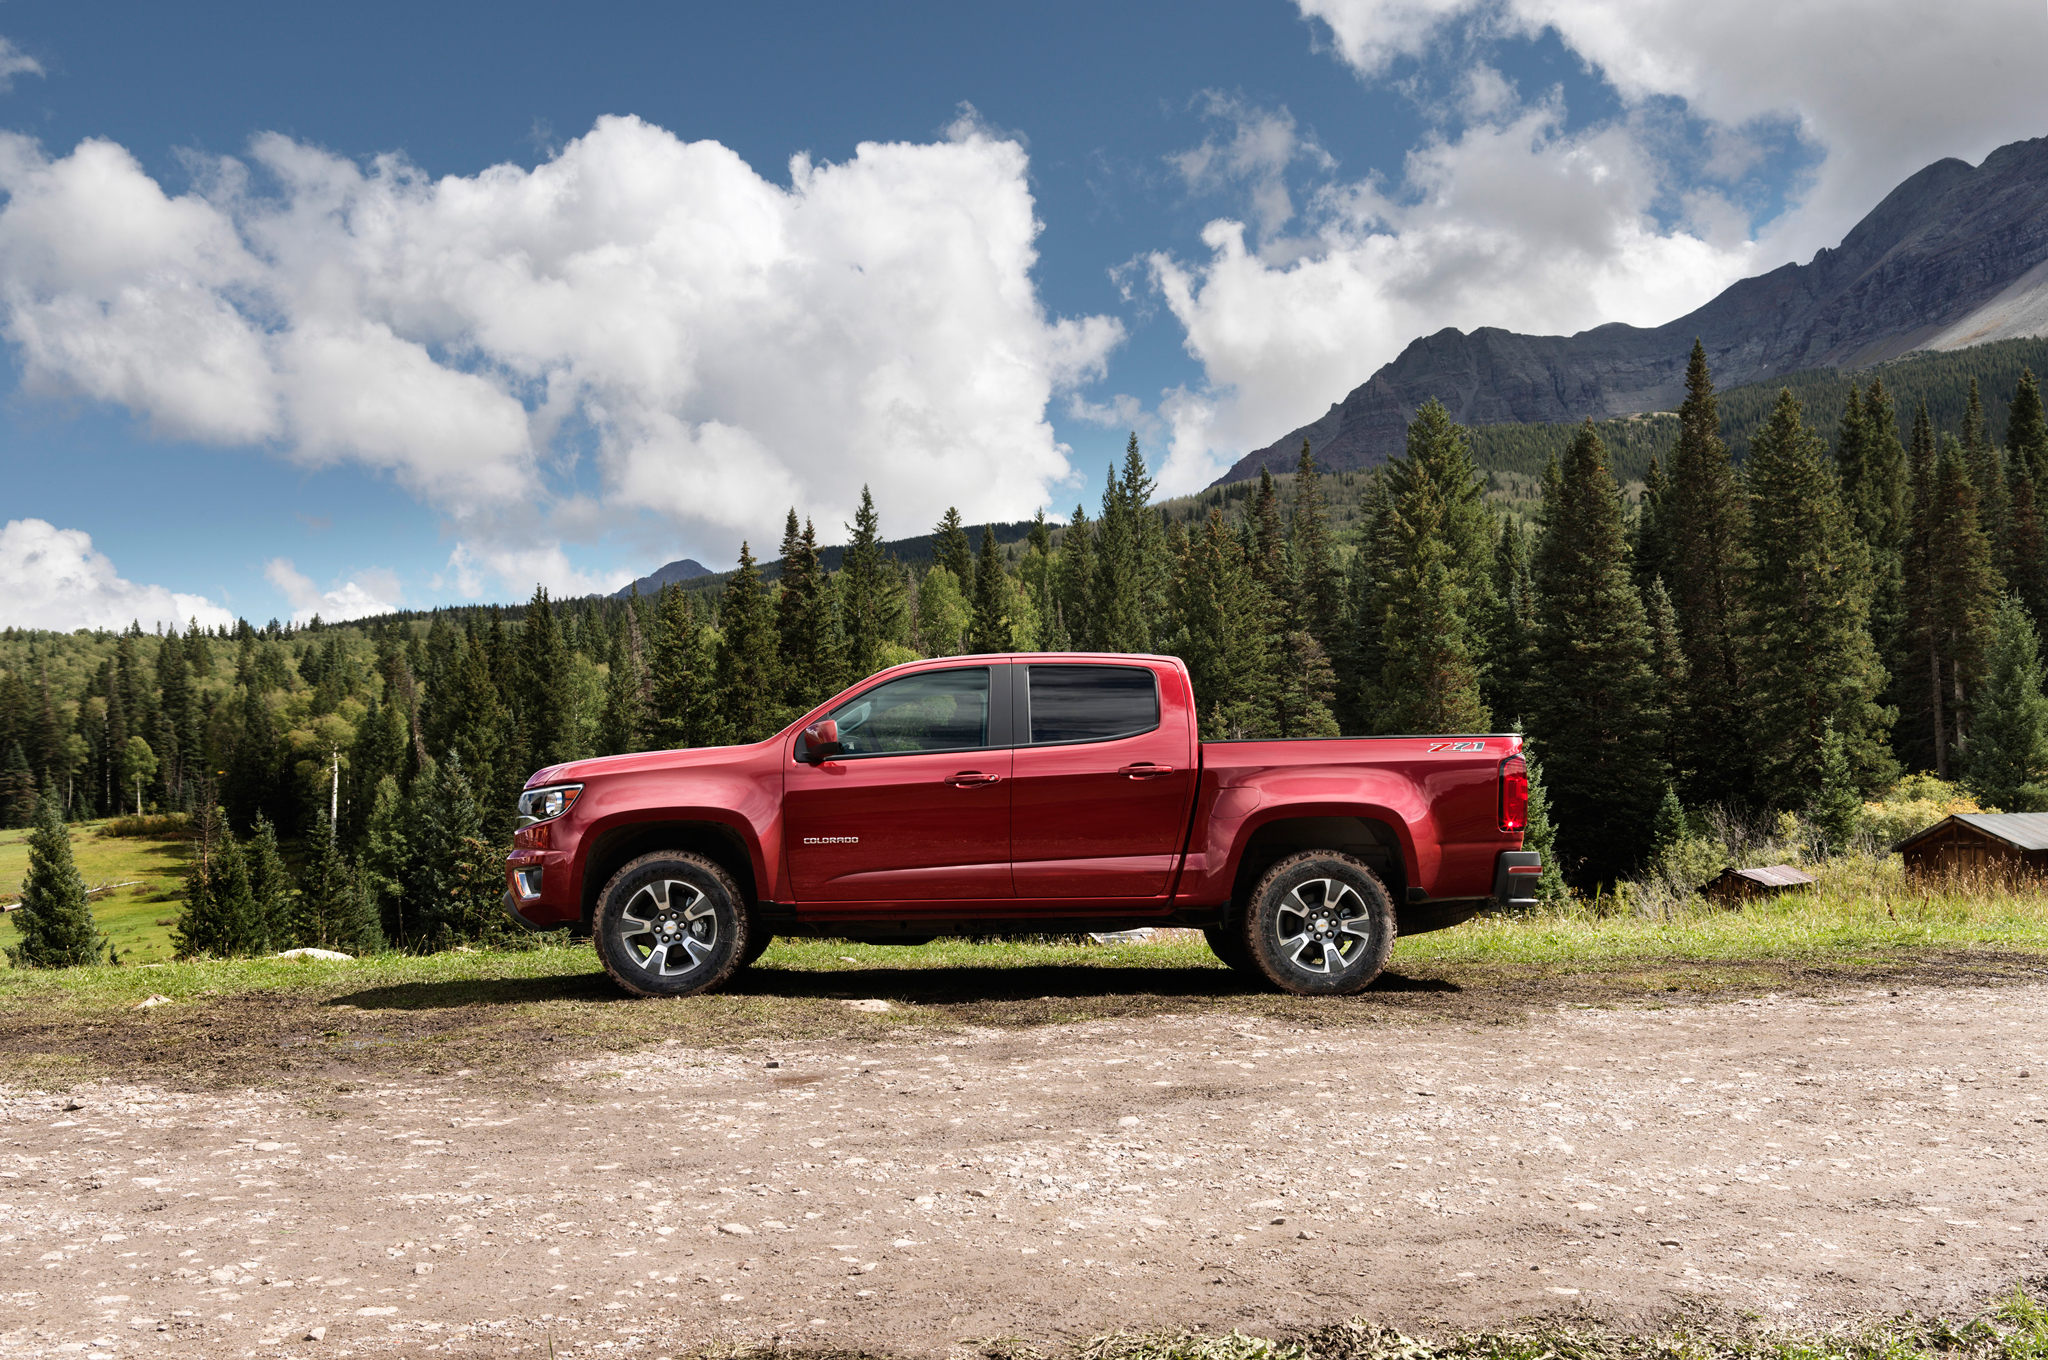 Nissan Frontier Vs Toyota Tacoma 17 Cool Hd Wallpaper - Chevy Colorado Wt Side View , HD Wallpaper & Backgrounds